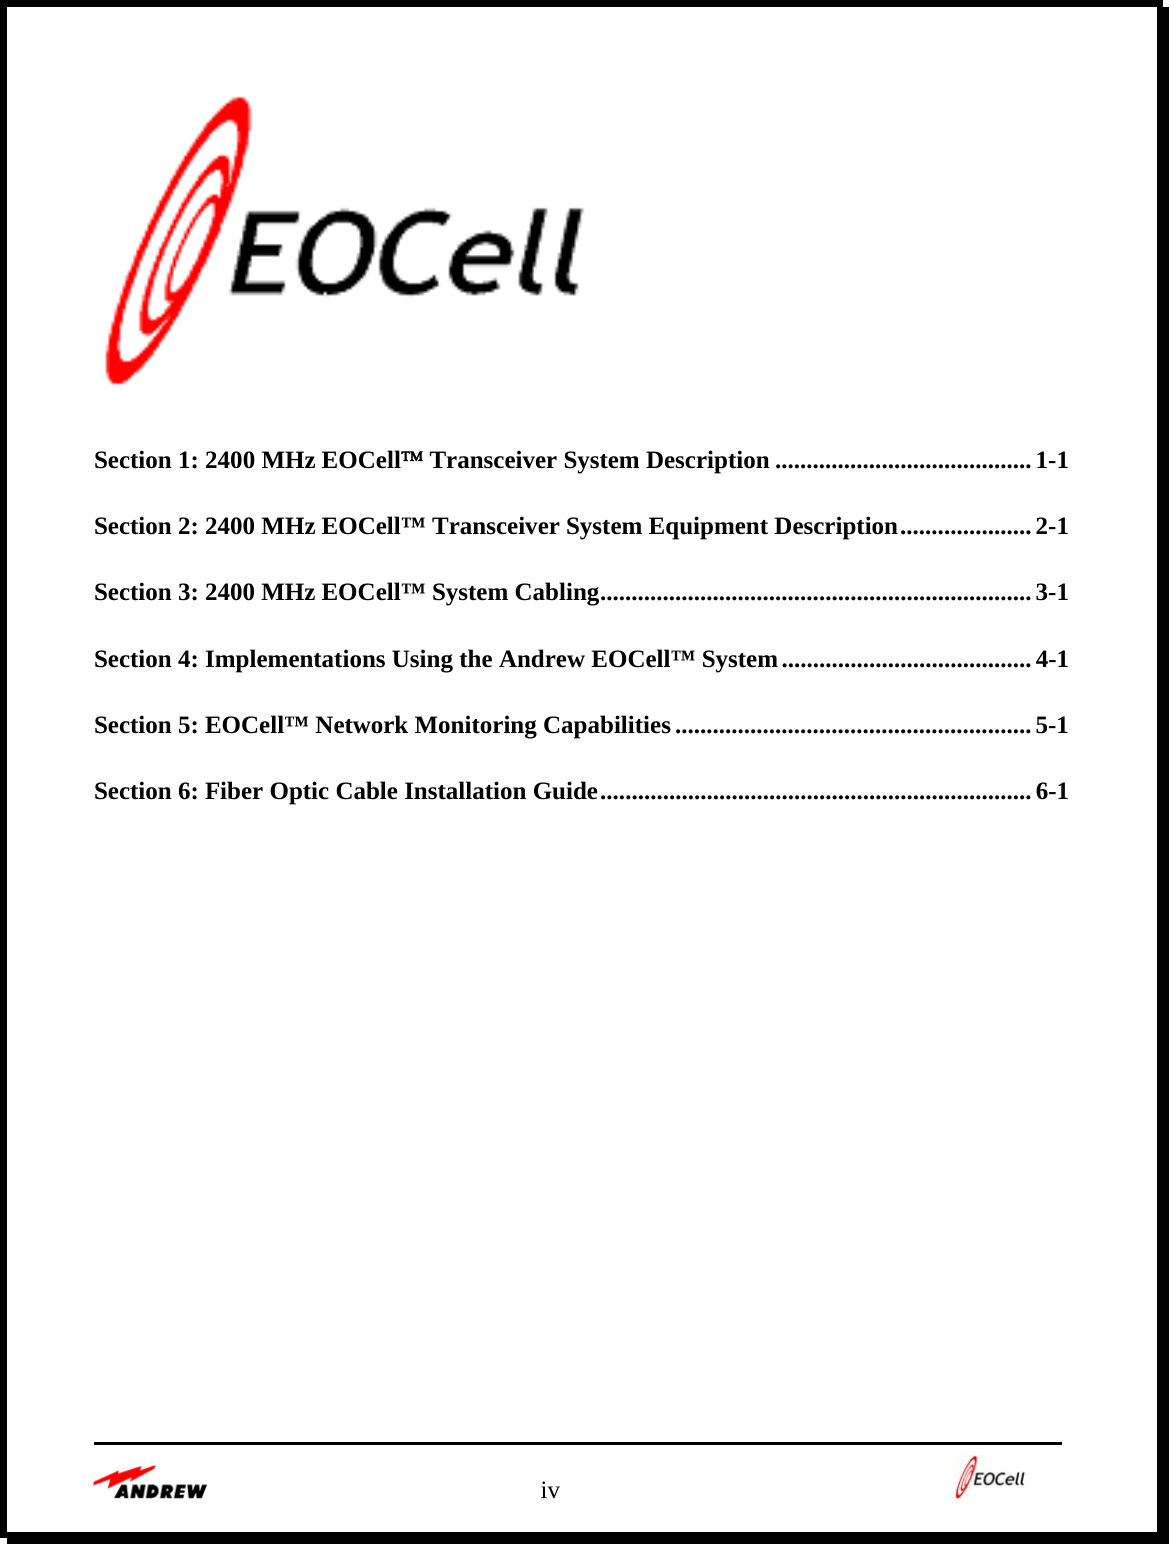   iv      Section 1: 2400 MHz EOCell™ Transceiver System Description ......................................... 1-1 Section 2: 2400 MHz EOCell™ Transceiver System Equipment Description..................... 2-1 Section 3: 2400 MHz EOCell™ System Cabling..................................................................... 3-1 Section 4: Implementations Using the Andrew EOCell™ System........................................ 4-1 Section 5: EOCell™ Network Monitoring Capabilities.........................................................5-1 Section 6: Fiber Optic Cable Installation Guide..................................................................... 6-1 